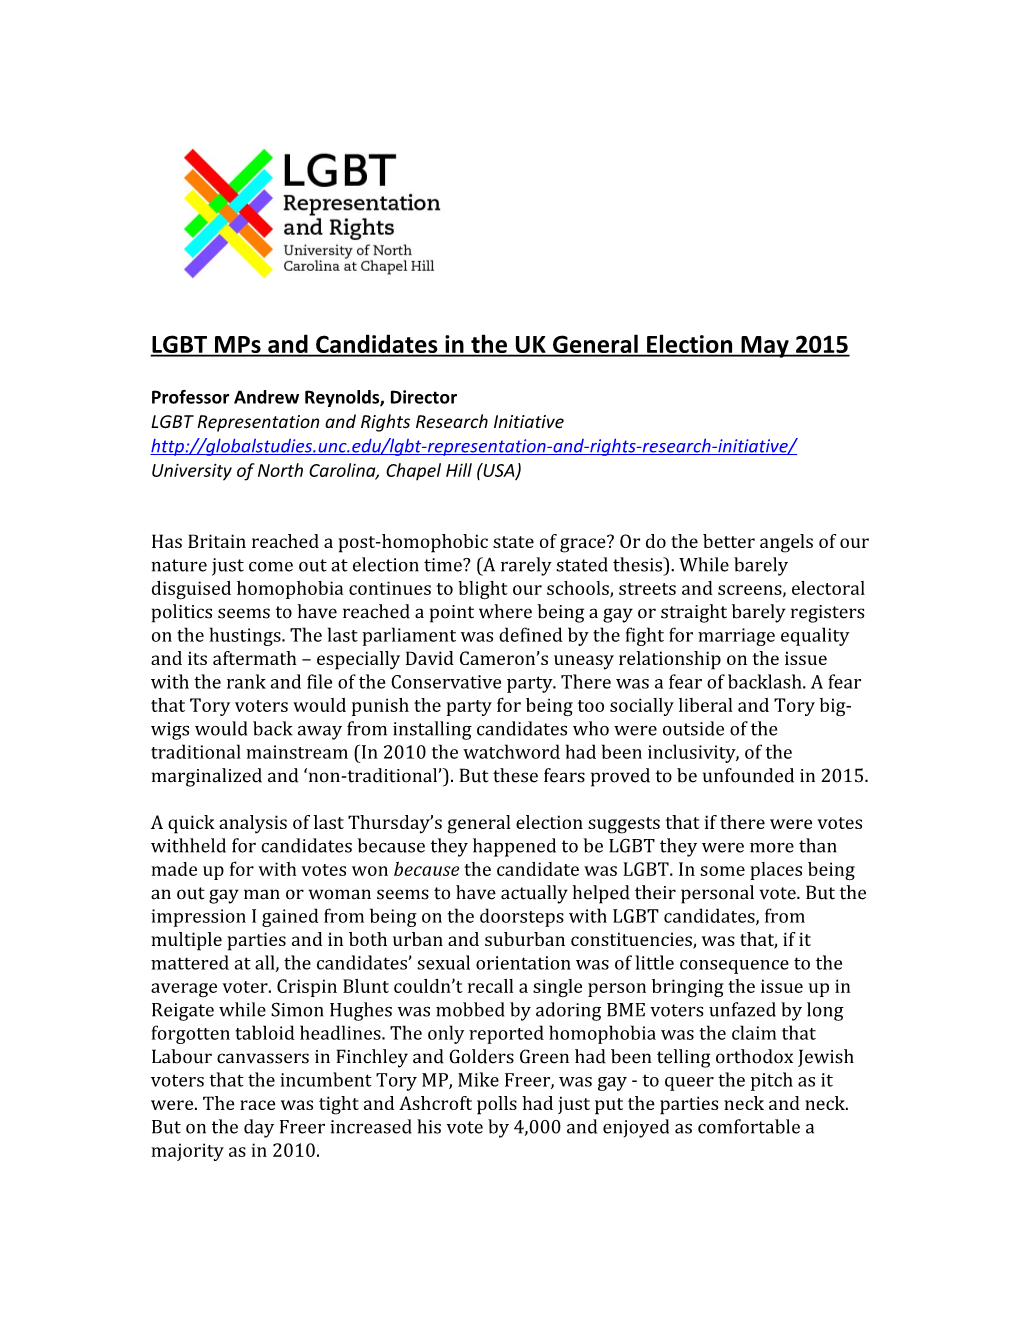 LGBT Mps and Candidatesin the UK General Election May 2015